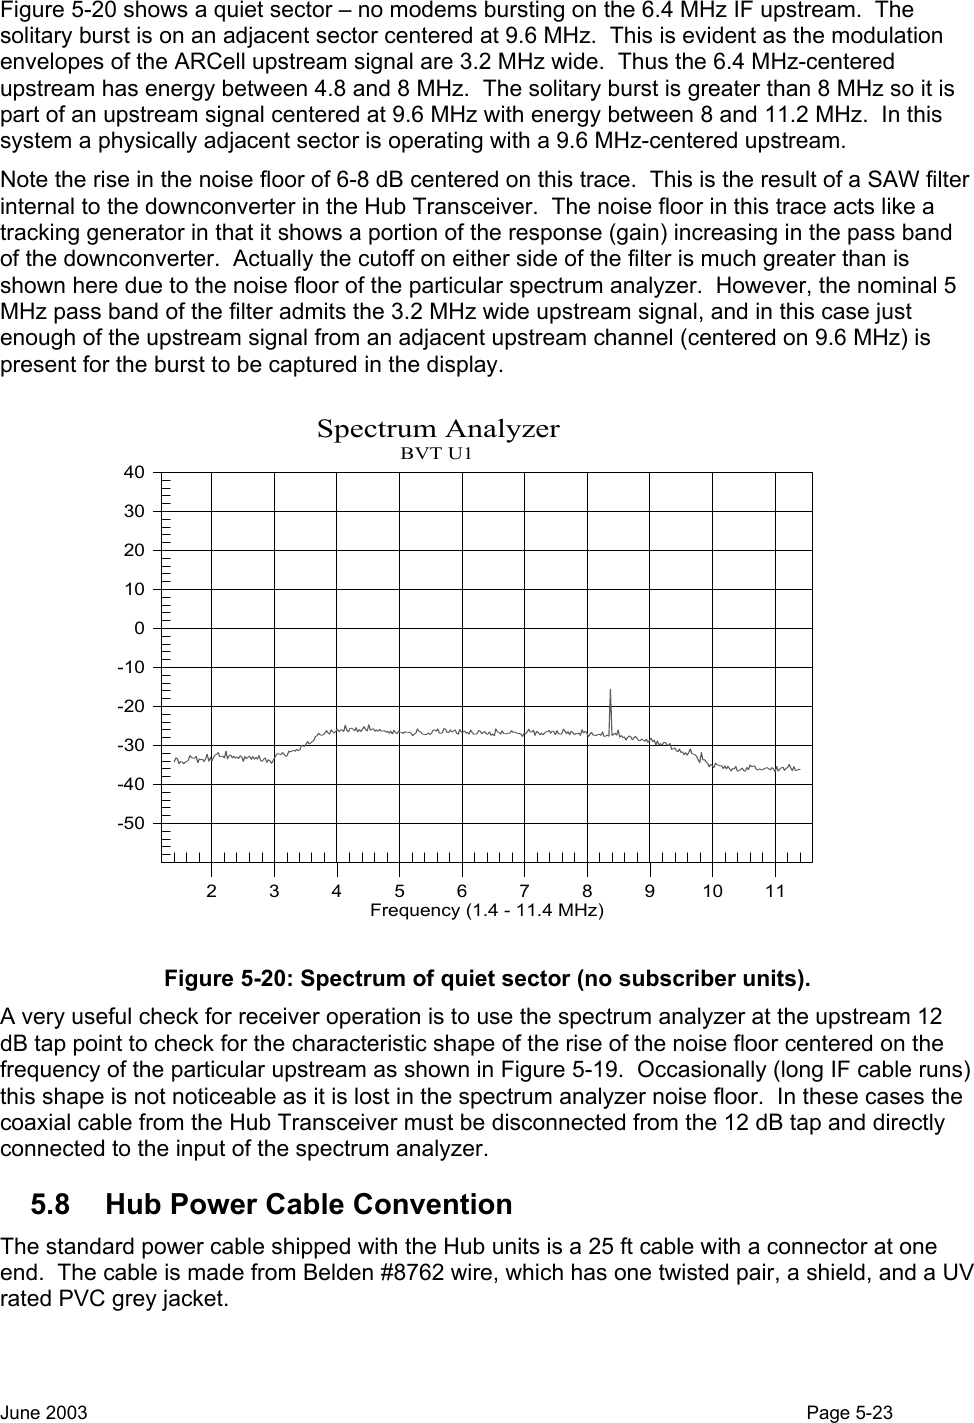  Figure 5-20 shows a quiet sector – no modems bursting on the 6.4 MHz IF upstream.  The solitary burst is on an adjacent sector centered at 9.6 MHz.  This is evident as the modulation envelopes of the ARCell upstream signal are 3.2 MHz wide.  Thus the 6.4 MHz-centered upstream has energy between 4.8 and 8 MHz.  The solitary burst is greater than 8 MHz so it is part of an upstream signal centered at 9.6 MHz with energy between 8 and 11.2 MHz.  In this system a physically adjacent sector is operating with a 9.6 MHz-centered upstream. Note the rise in the noise floor of 6-8 dB centered on this trace.  This is the result of a SAW filter internal to the downconverter in the Hub Transceiver.  The noise floor in this trace acts like a tracking generator in that it shows a portion of the response (gain) increasing in the pass band of the downconverter.  Actually the cutoff on either side of the filter is much greater than is shown here due to the noise floor of the particular spectrum analyzer.  However, the nominal 5 MHz pass band of the filter admits the 3.2 MHz wide upstream signal, and in this case just enough of the upstream signal from an adjacent upstream channel (centered on 9.6 MHz) is present for the burst to be captured in the display. -50-40-30-20-100102030402345678910 11                                    Spectrum AnalyzerBVT U1Frequency (1.4 - 11.4 MHz) Figure 5-20: Spectrum of quiet sector (no subscriber units). A very useful check for receiver operation is to use the spectrum analyzer at the upstream 12 dB tap point to check for the characteristic shape of the rise of the noise floor centered on the frequency of the particular upstream as shown in Figure 5-19.  Occasionally (long IF cable runs) this shape is not noticeable as it is lost in the spectrum analyzer noise floor.  In these cases the coaxial cable from the Hub Transceiver must be disconnected from the 12 dB tap and directly connected to the input of the spectrum analyzer. 5.8  Hub Power Cable Convention The standard power cable shipped with the Hub units is a 25 ft cable with a connector at one end.  The cable is made from Belden #8762 wire, which has one twisted pair, a shield, and a UV rated PVC grey jacket.   June 2003                                                                                                                                          Page 5-23  